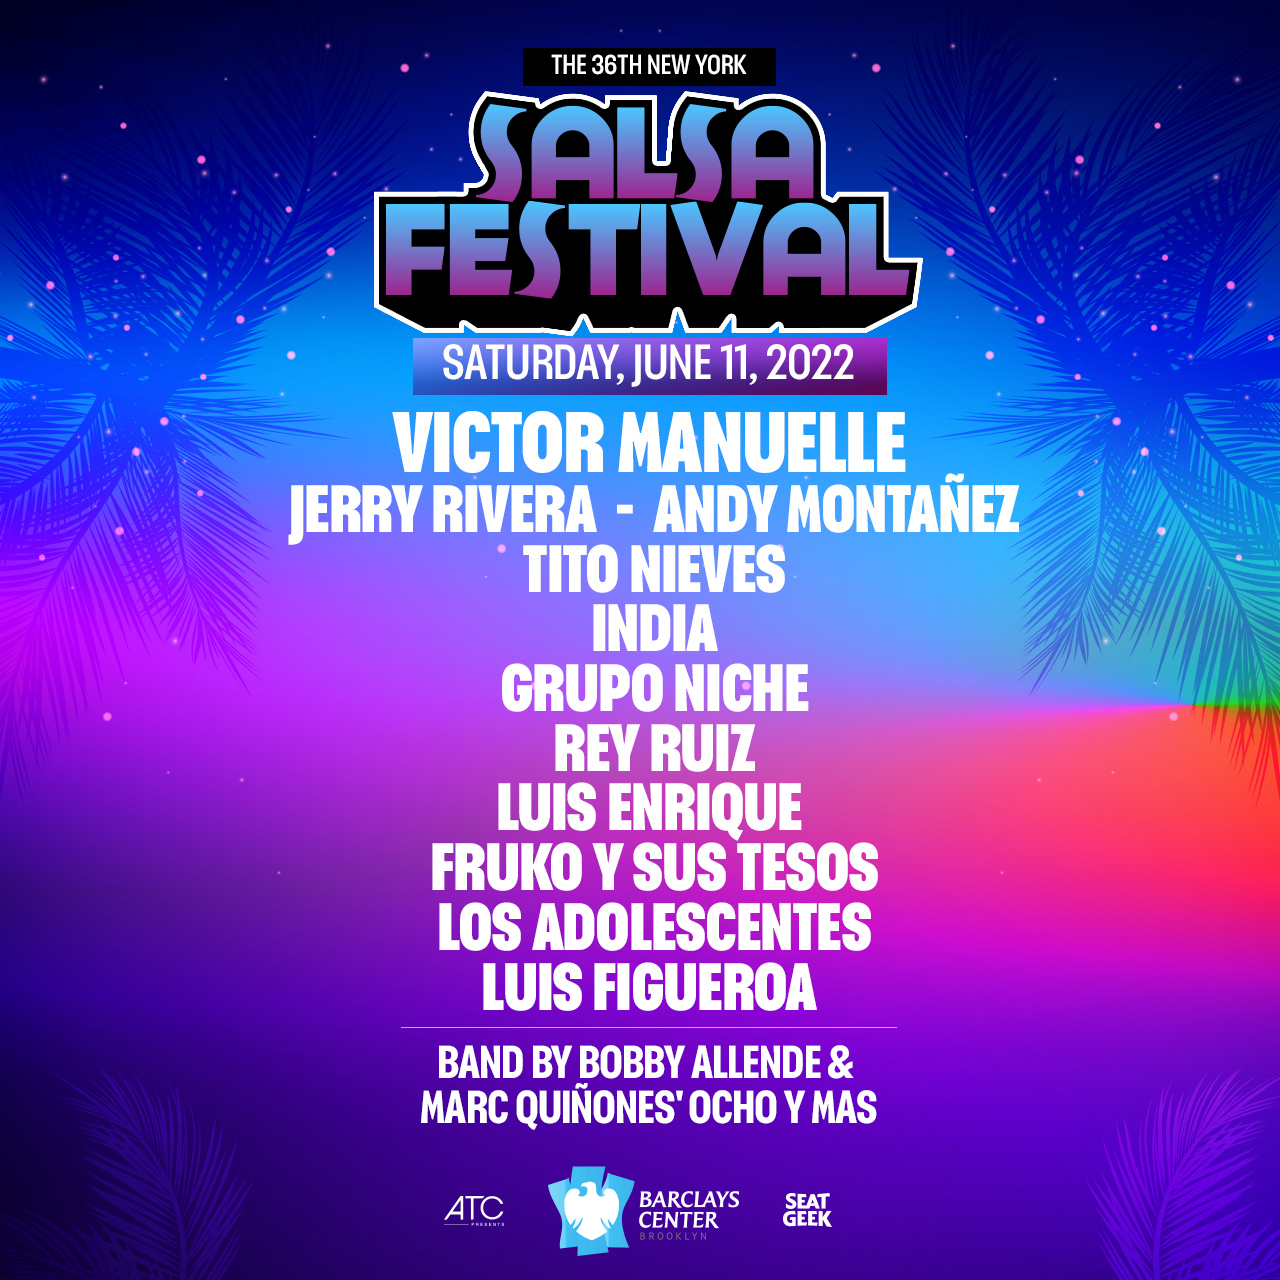 New York Salsa Festival: Victor Manuelle, Jerry Rivera, Andy Montanez & Tito Nieves